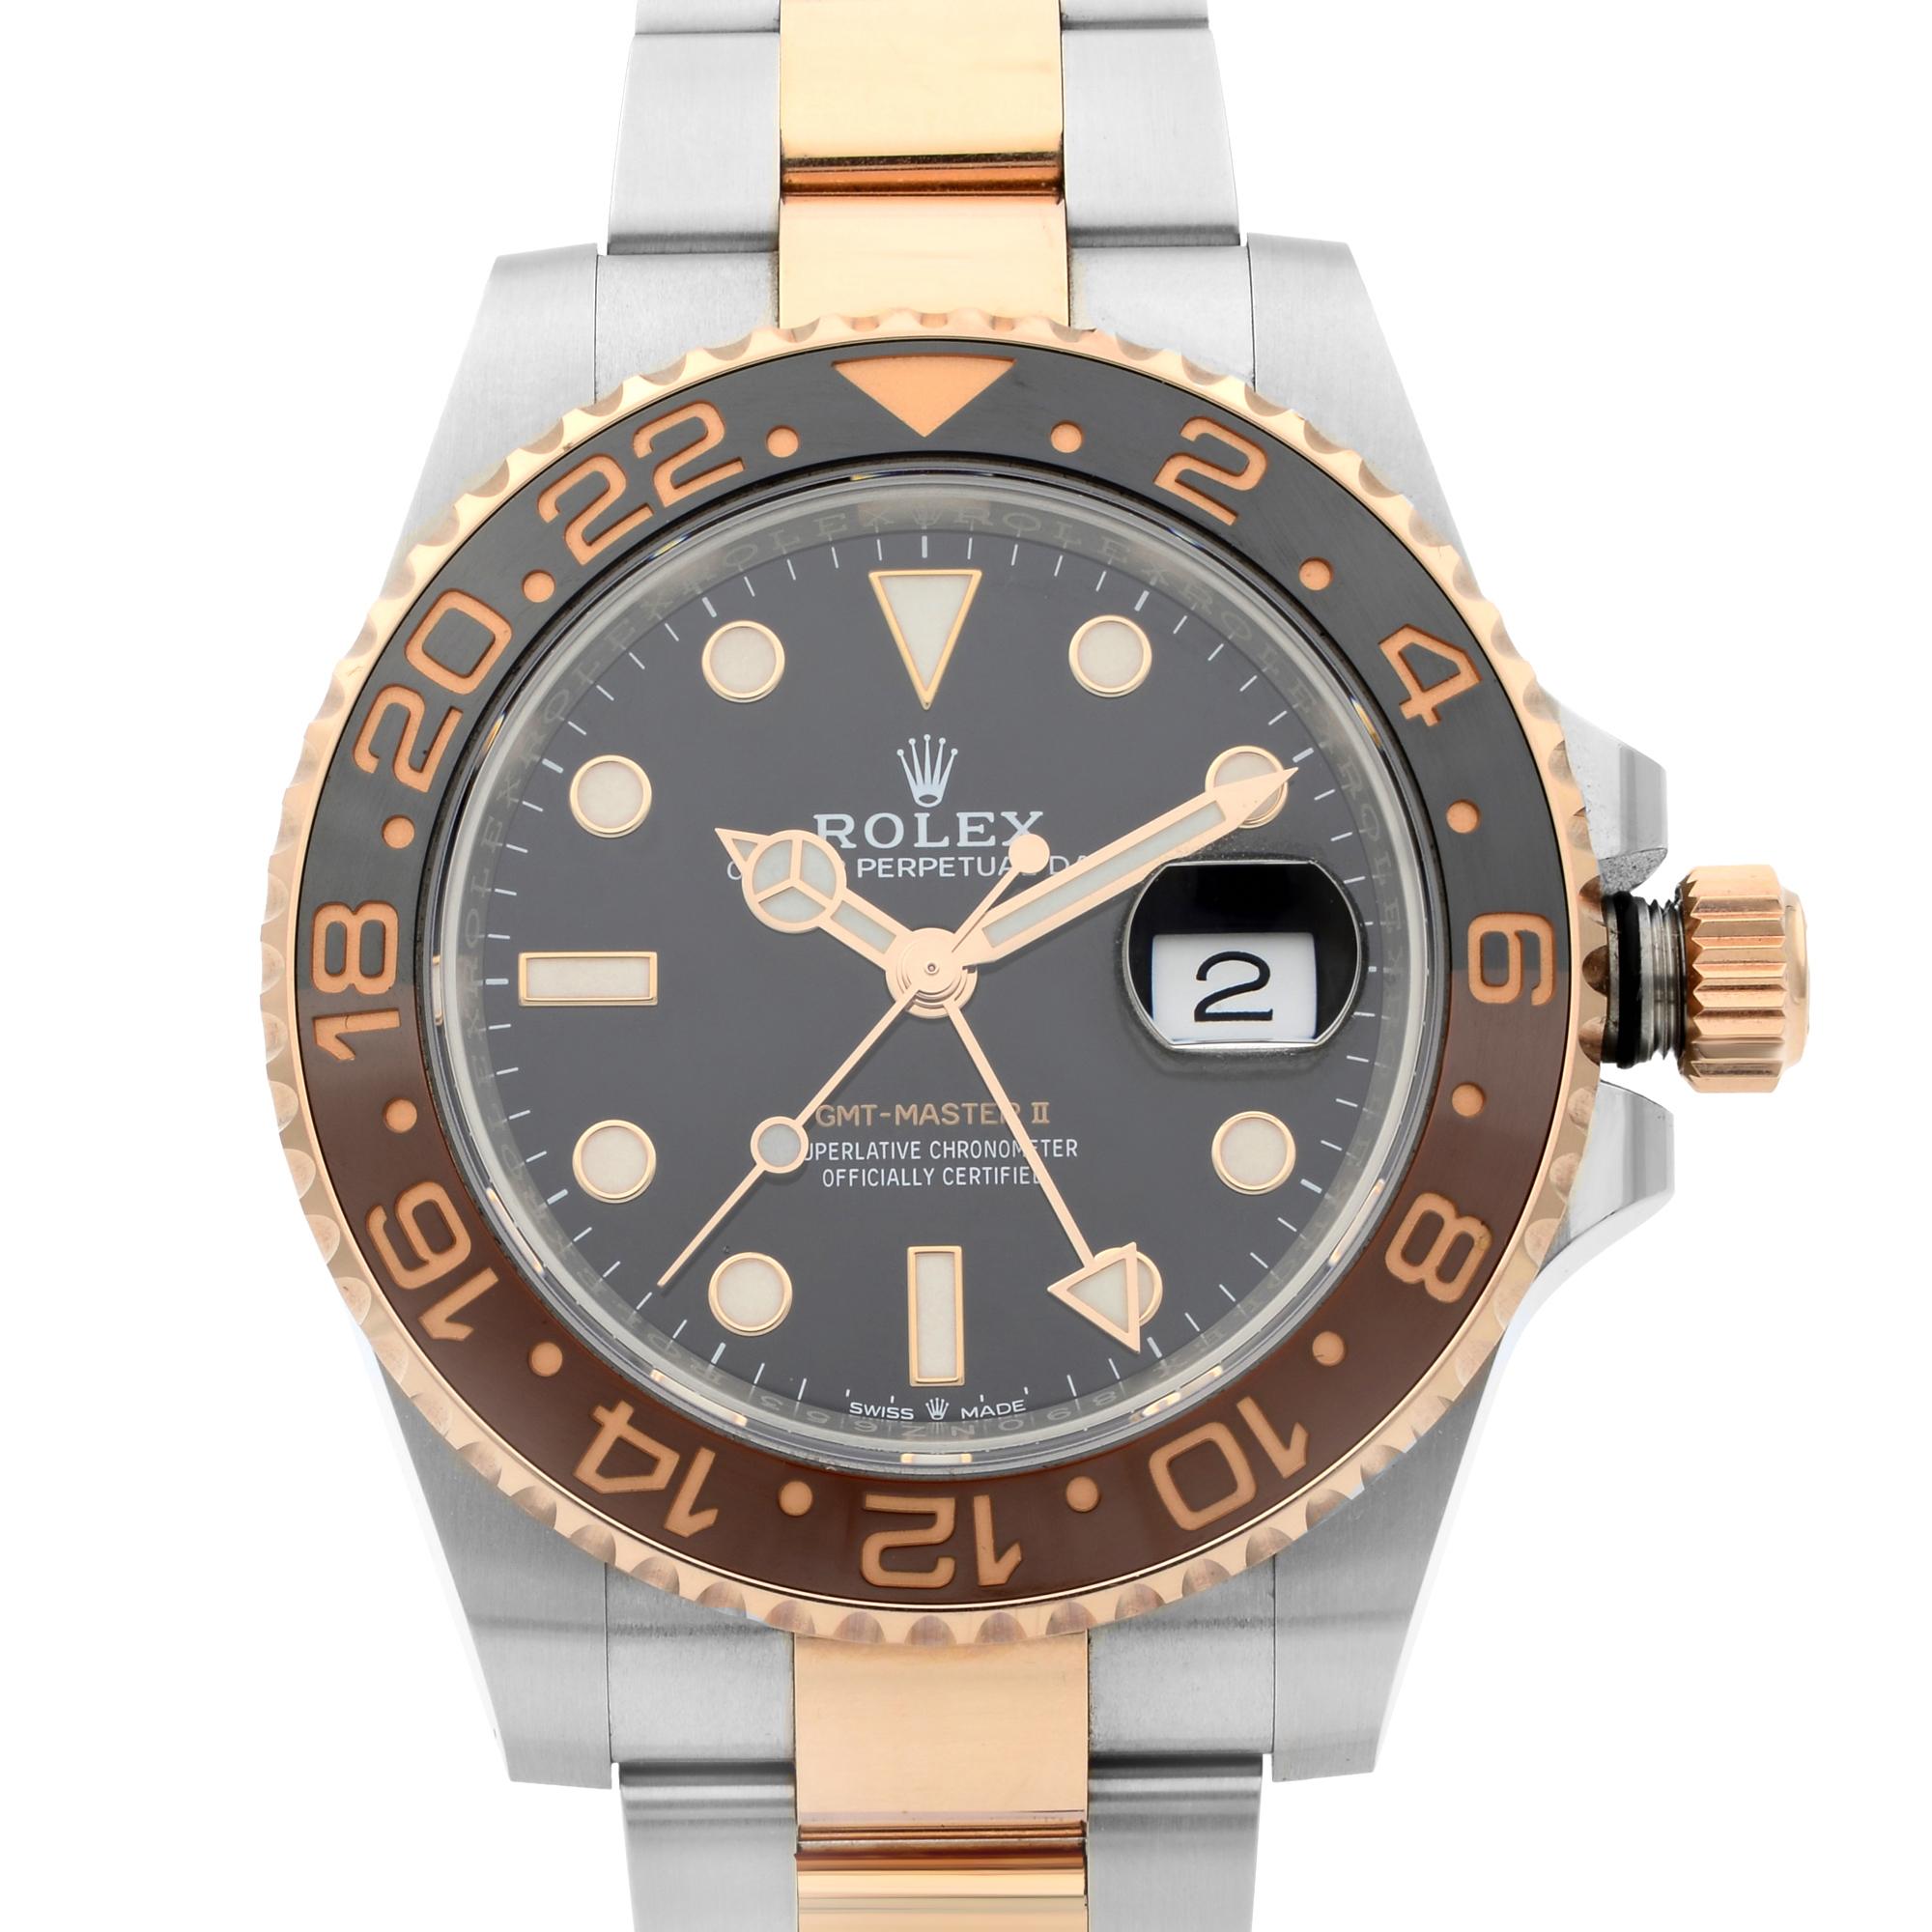 New February 2021 Rolex GMT-Master II Steel and 18k Everose Gold Root Beer Men's Watch. This Beautiful Timepiece Features: Everose Rolesor - Combination of Oystersteel and 18k Everose Gold, Centre Hour, Minute and Seconds Hands, 24-hour Display,